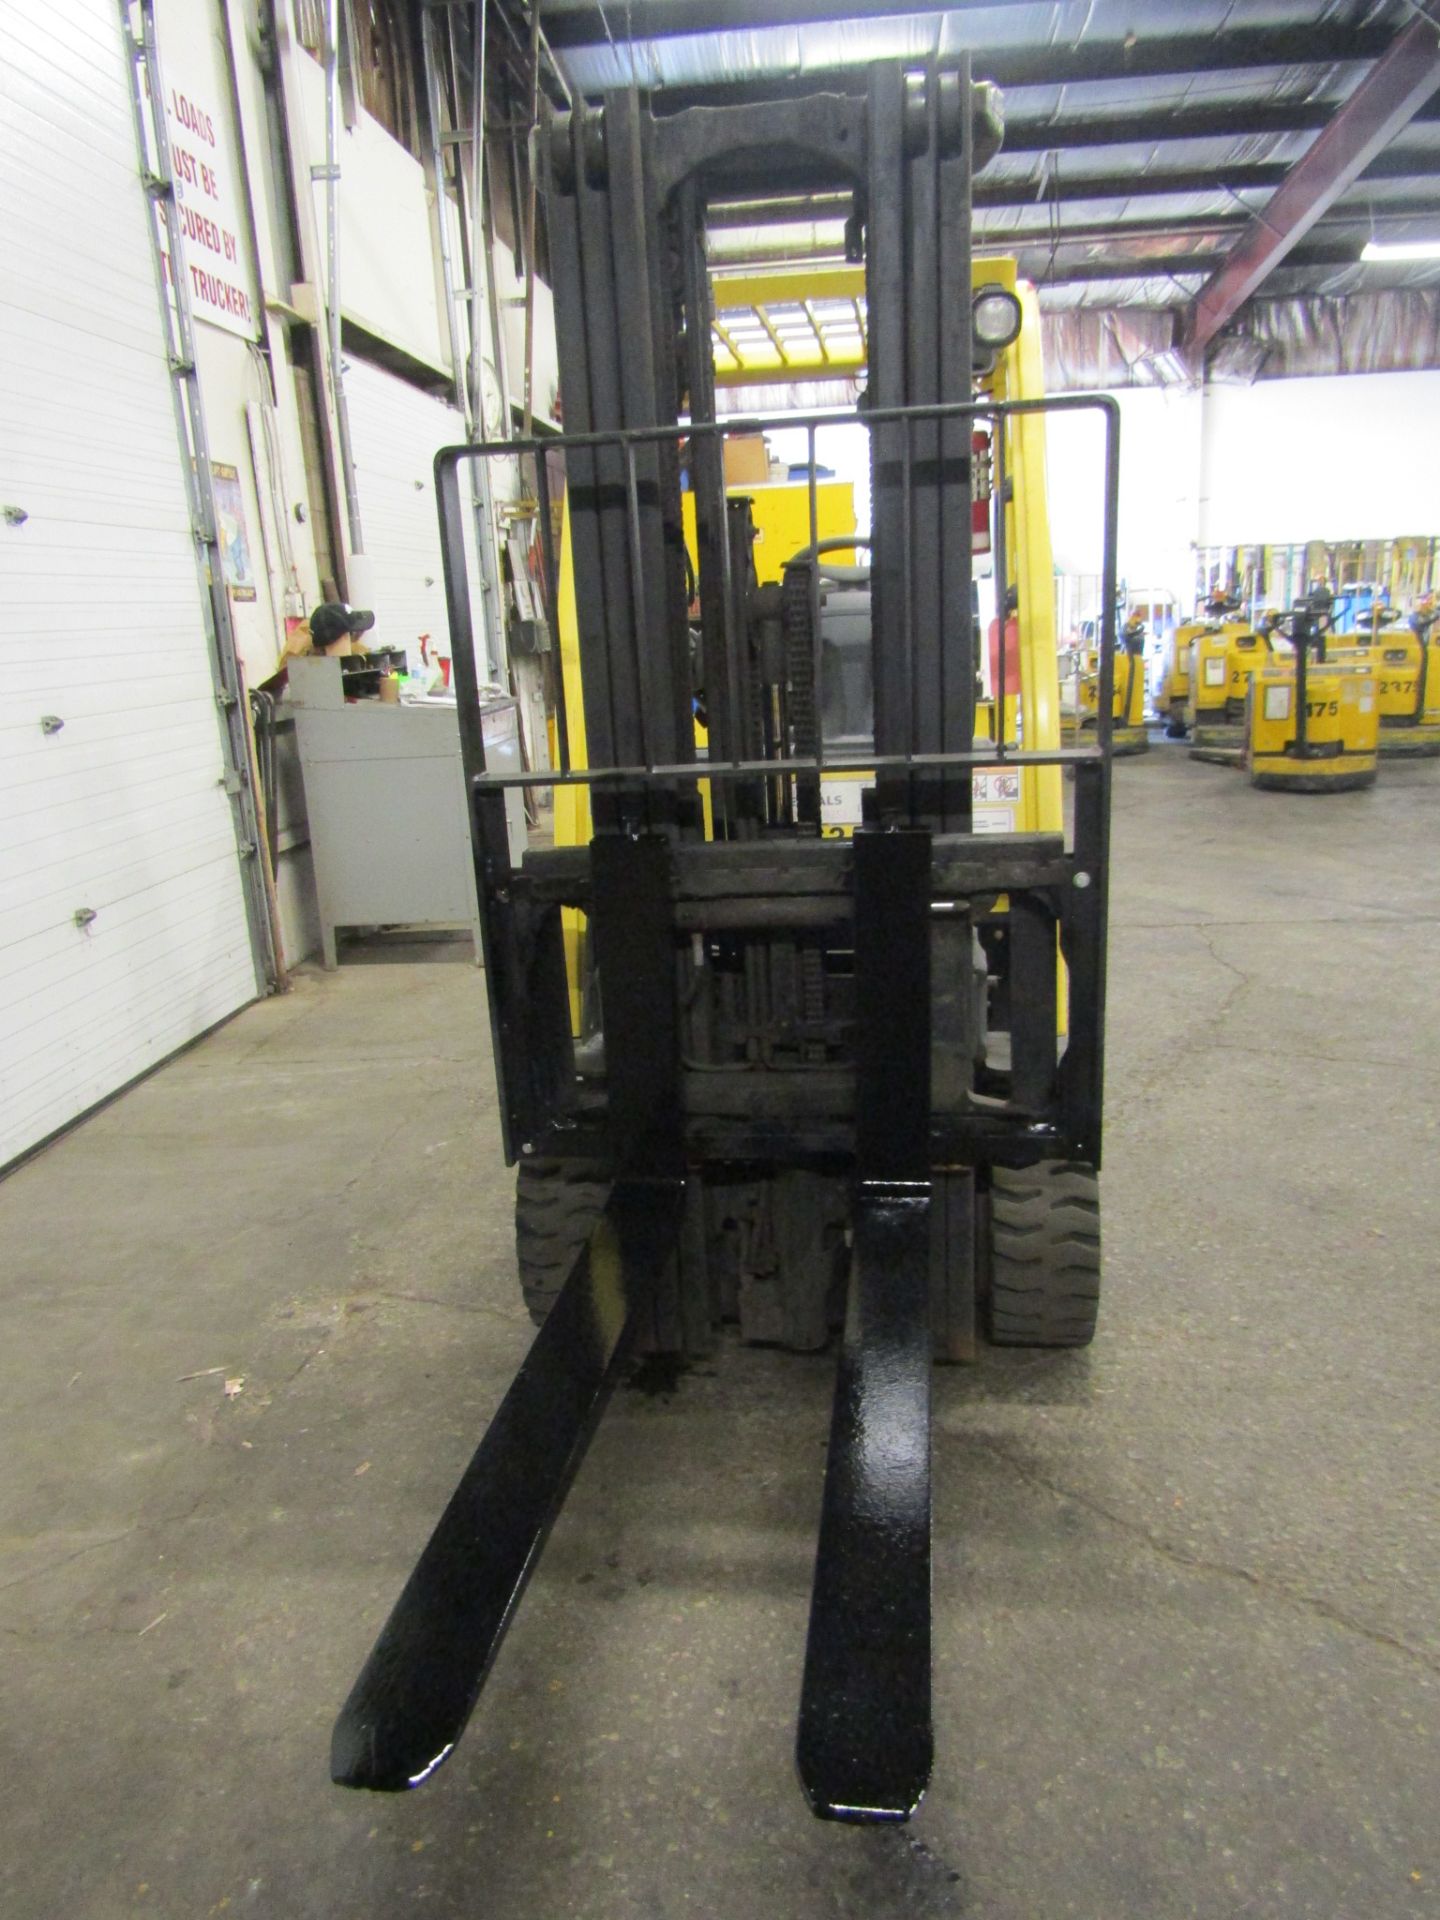 2011 Hyster 6000lbs Capacity Forklift with 3-stage mast - LPG (propane) with sideshift (no propane - Image 2 of 2